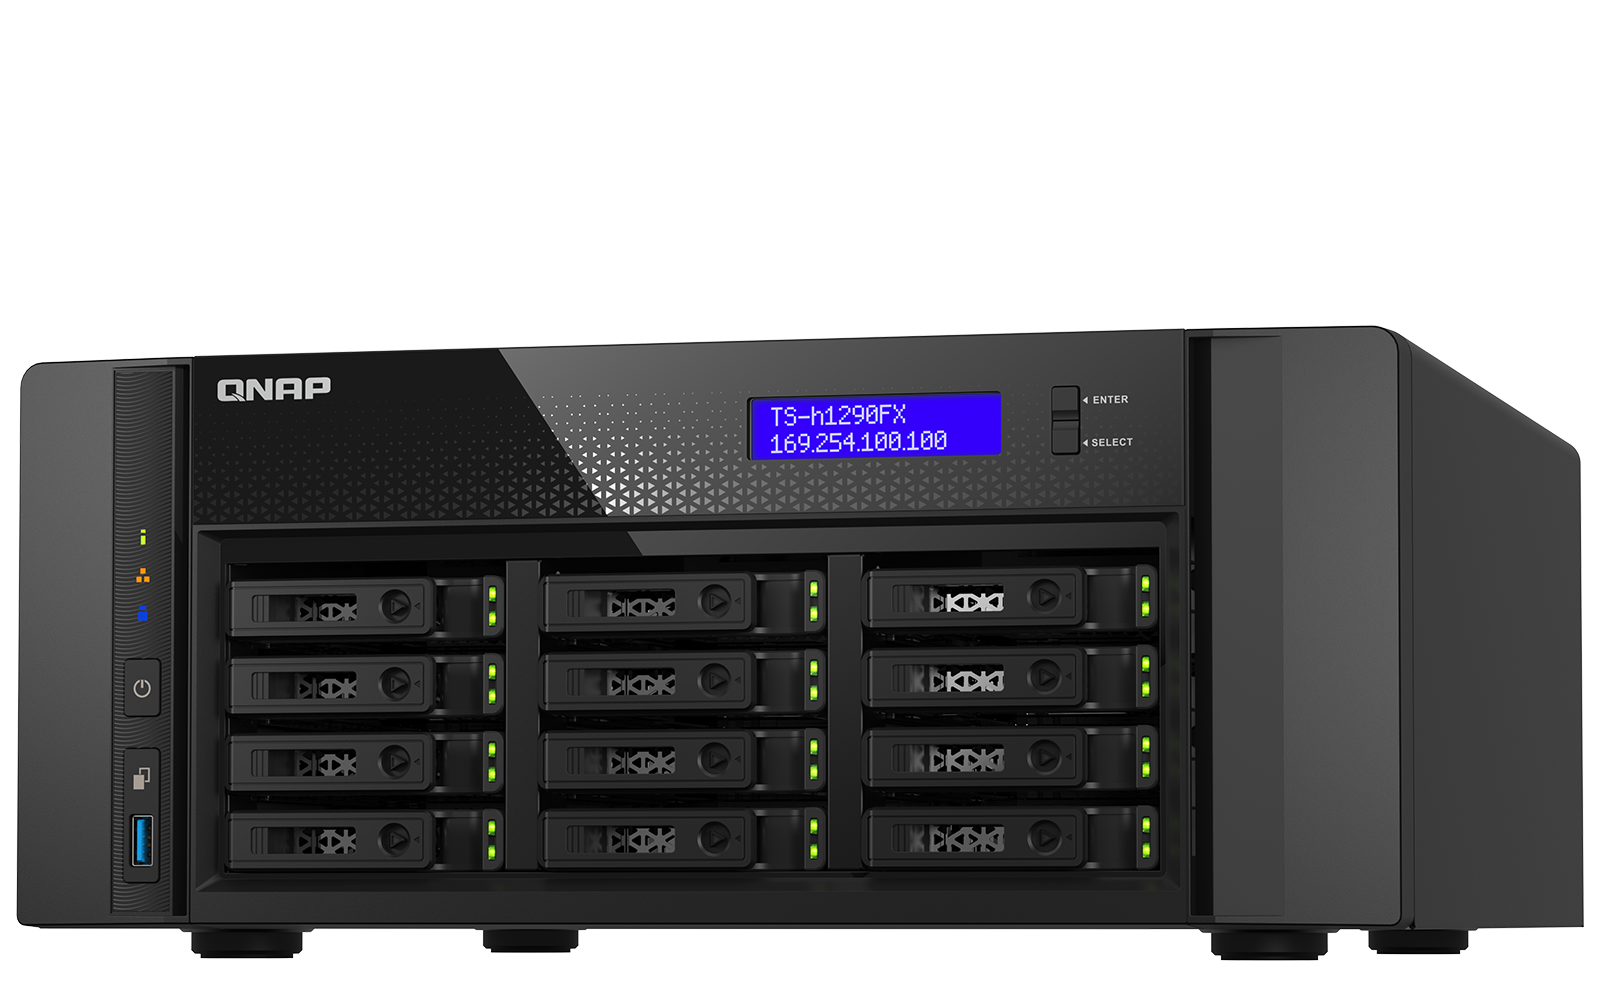 QNAP TS-h1290FX Powerful 12-bay U.2 NVMe SATA all-flash NAS featuring ZFS-based storage and 25GbE connectivity ideal for office environments collaborative 4K 8K video editing and file sharing (Supports QuTS hero or QTS system)